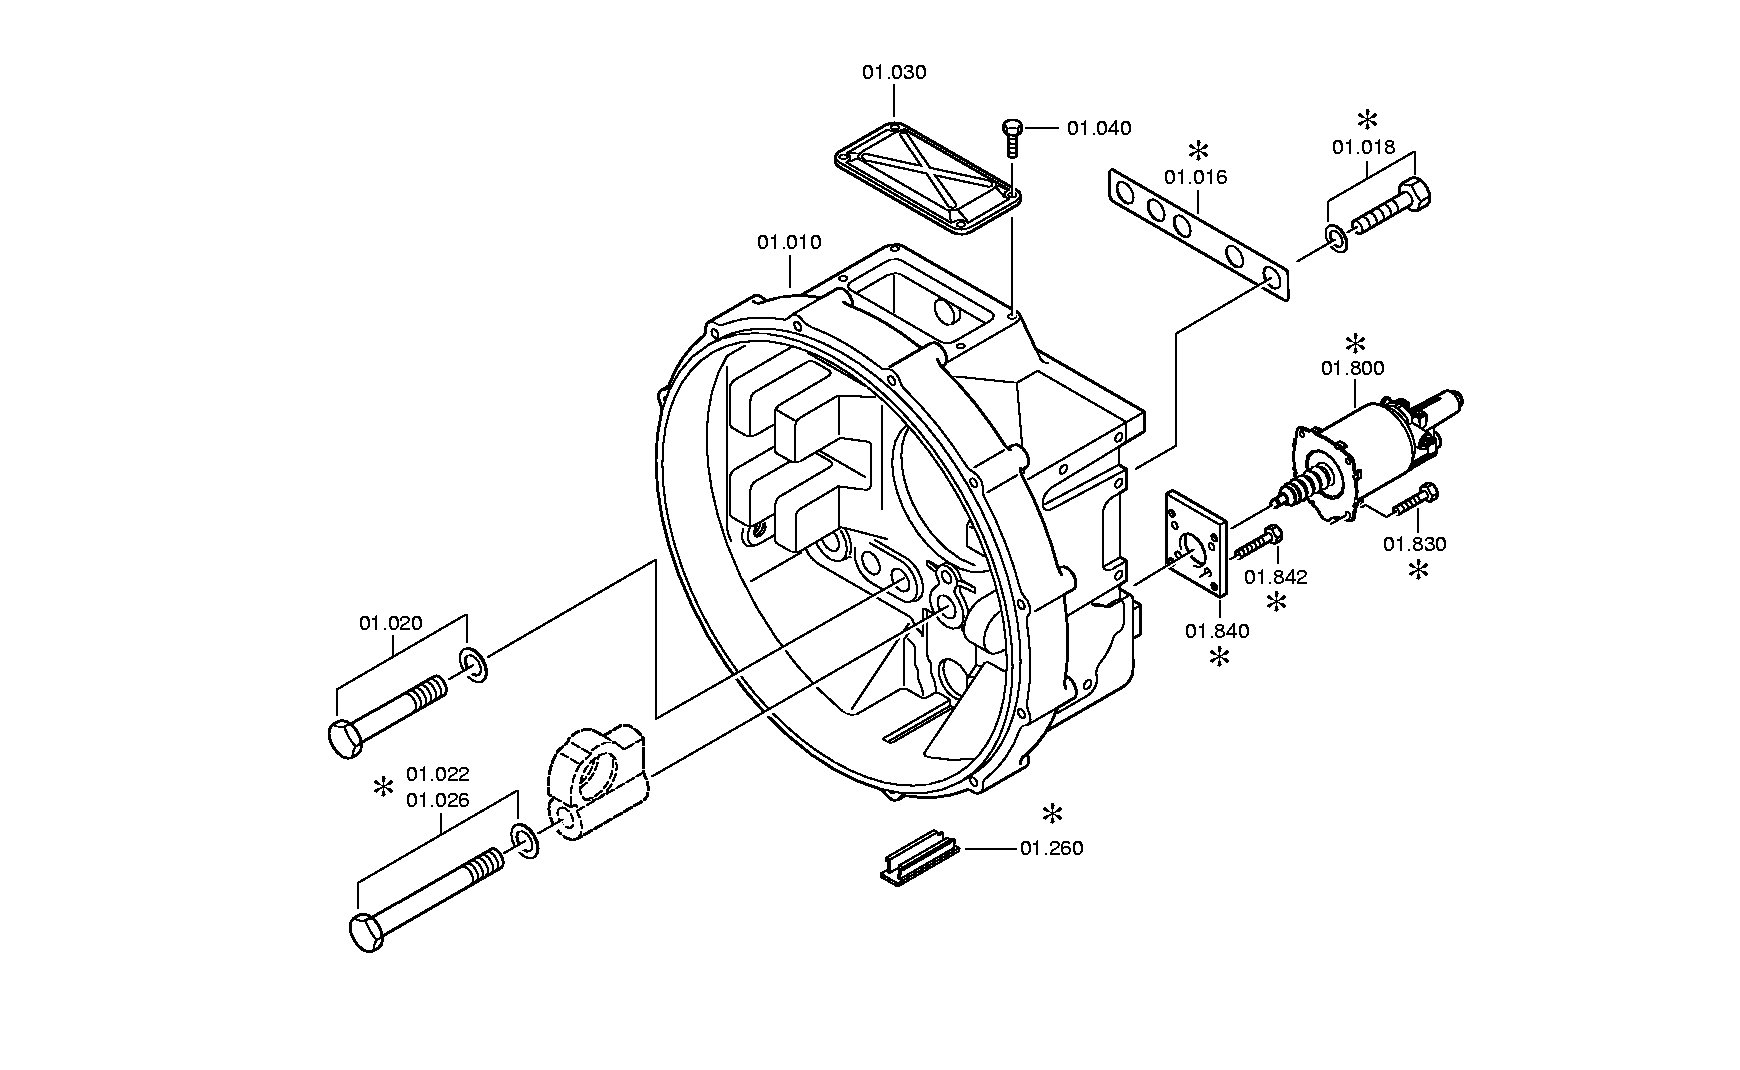 drawing for CARROCERIAS AYATS 0501006795 - CLUTCH CYLINDER (figure 5)